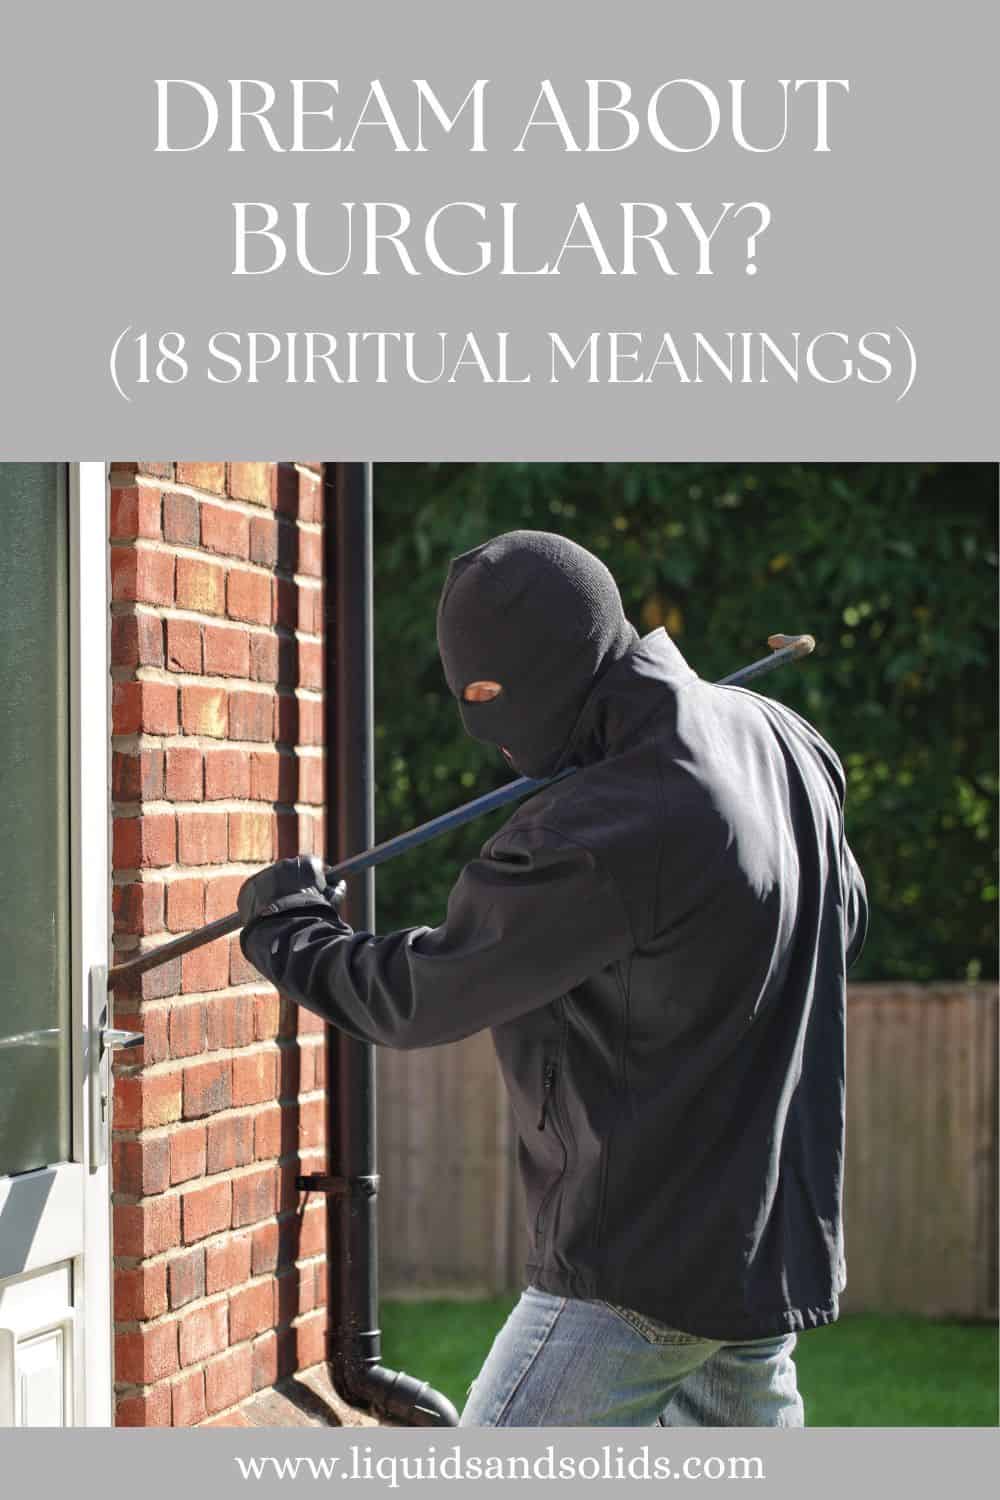 Dream About Burglary? (18 Spiritual Meanings)